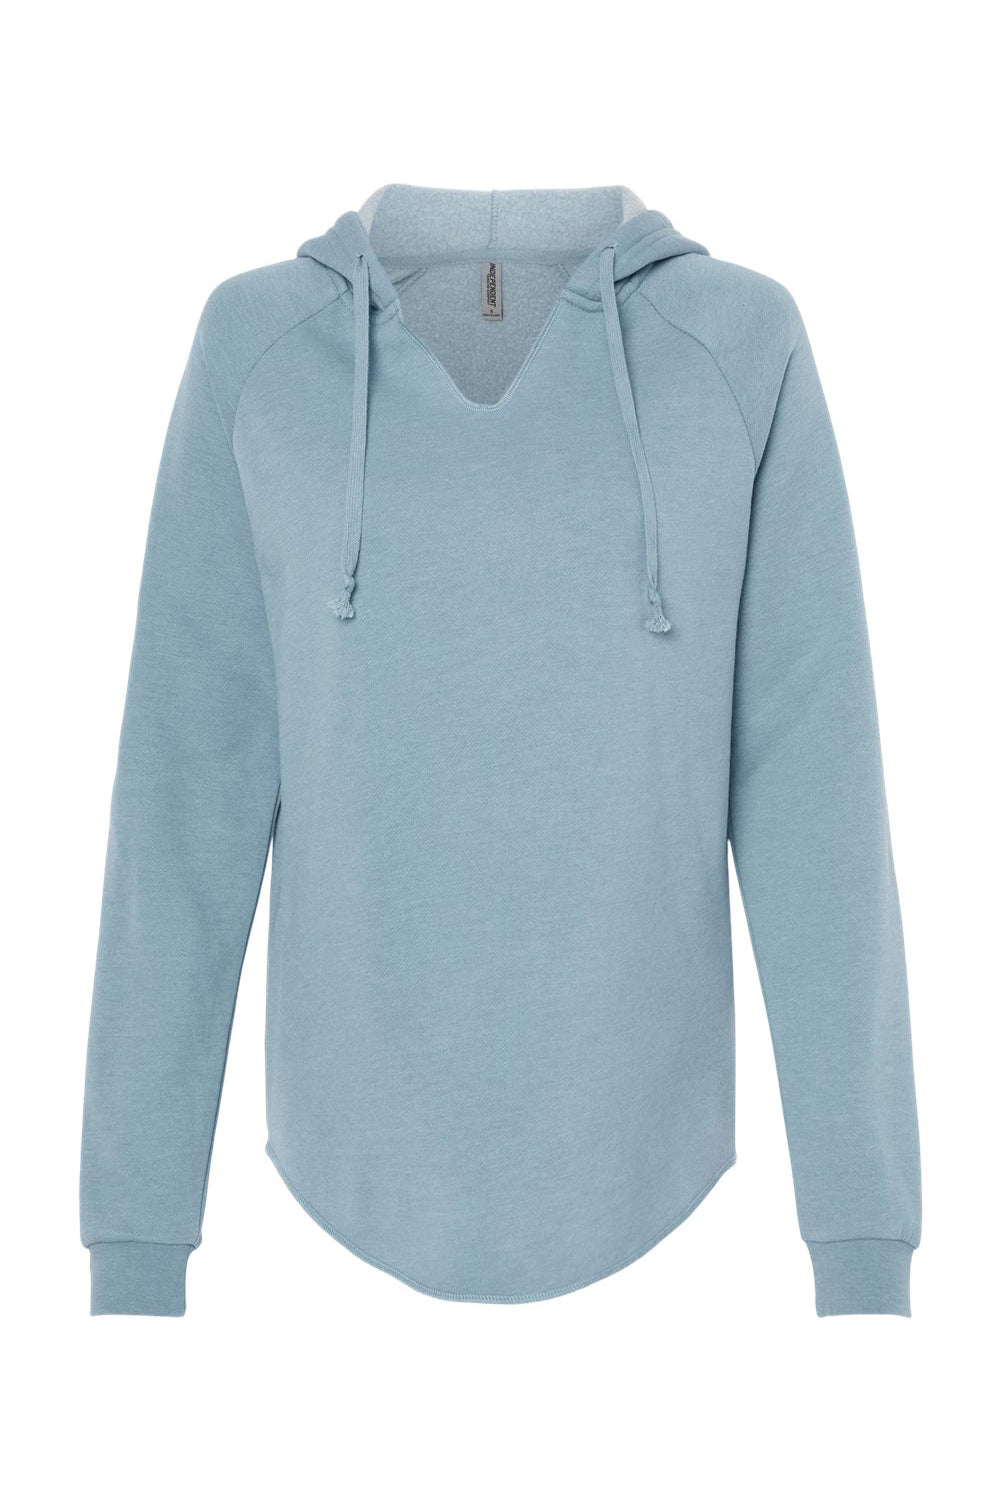 Independent Trading Co. PRM2500 Womens California Wave Wash Hooded Sweatshirt Hoodie Misty Blue Flat Front